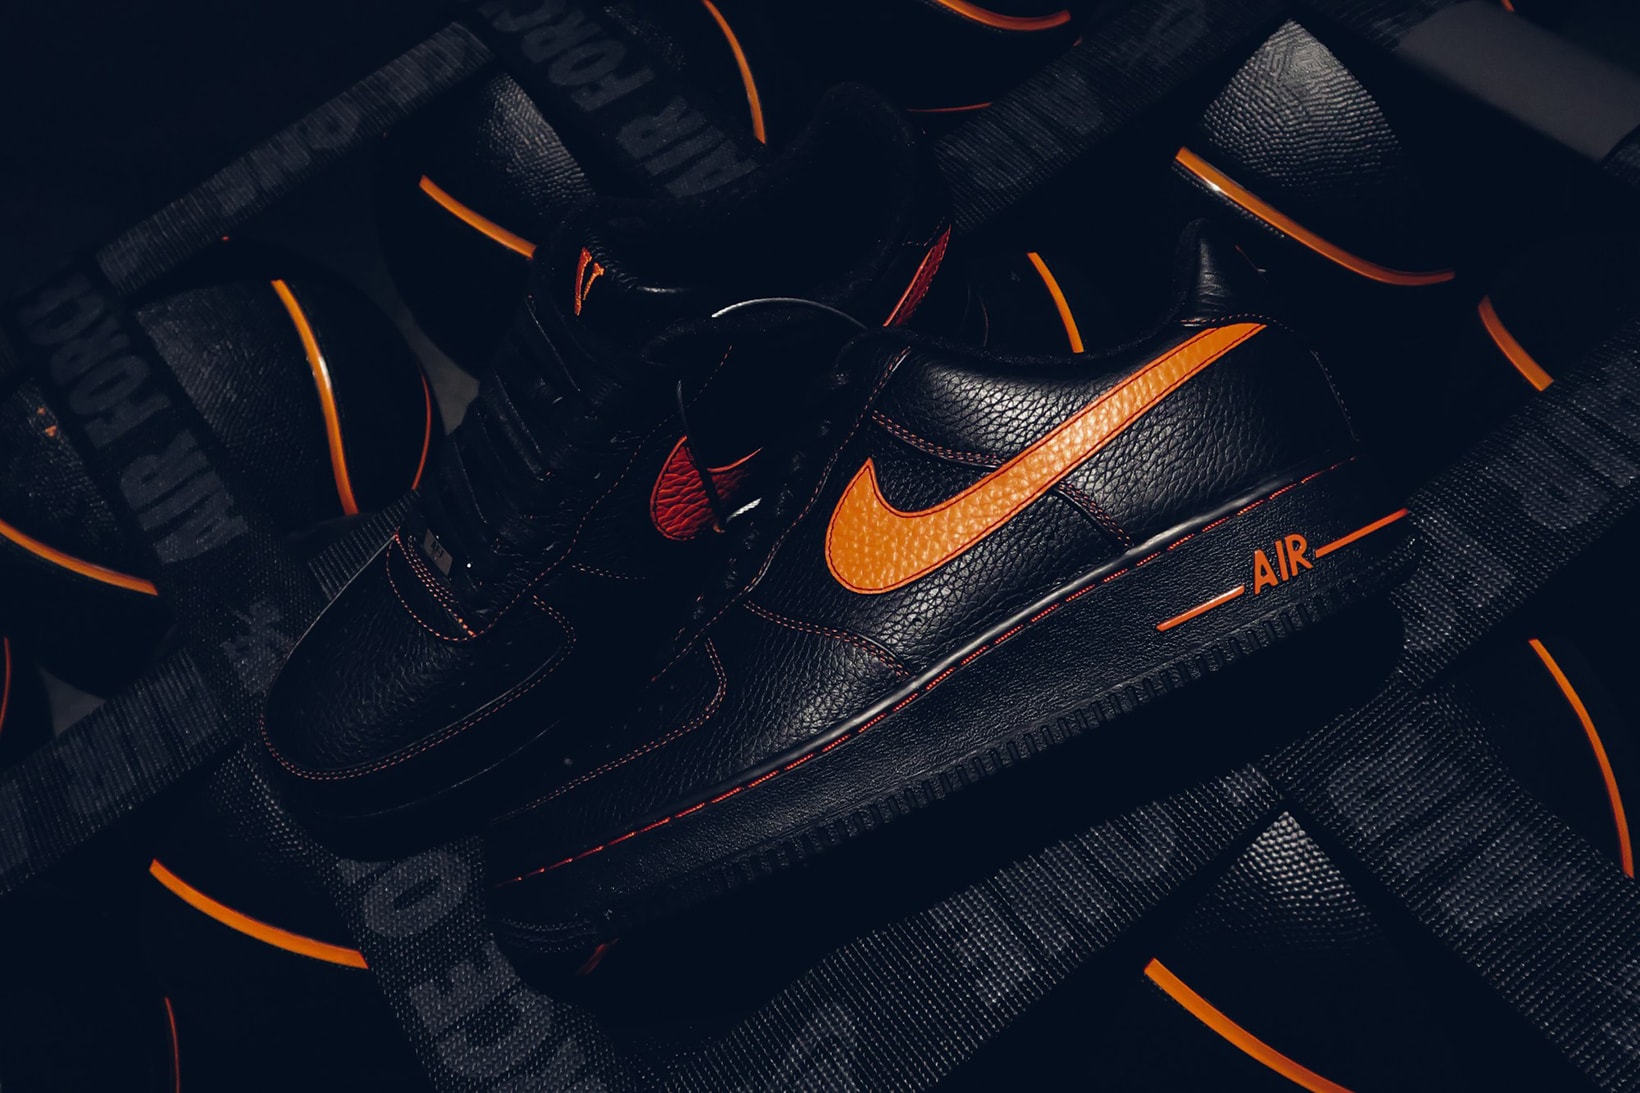 Add VLONE Nike Air Force 1 to Your Collection